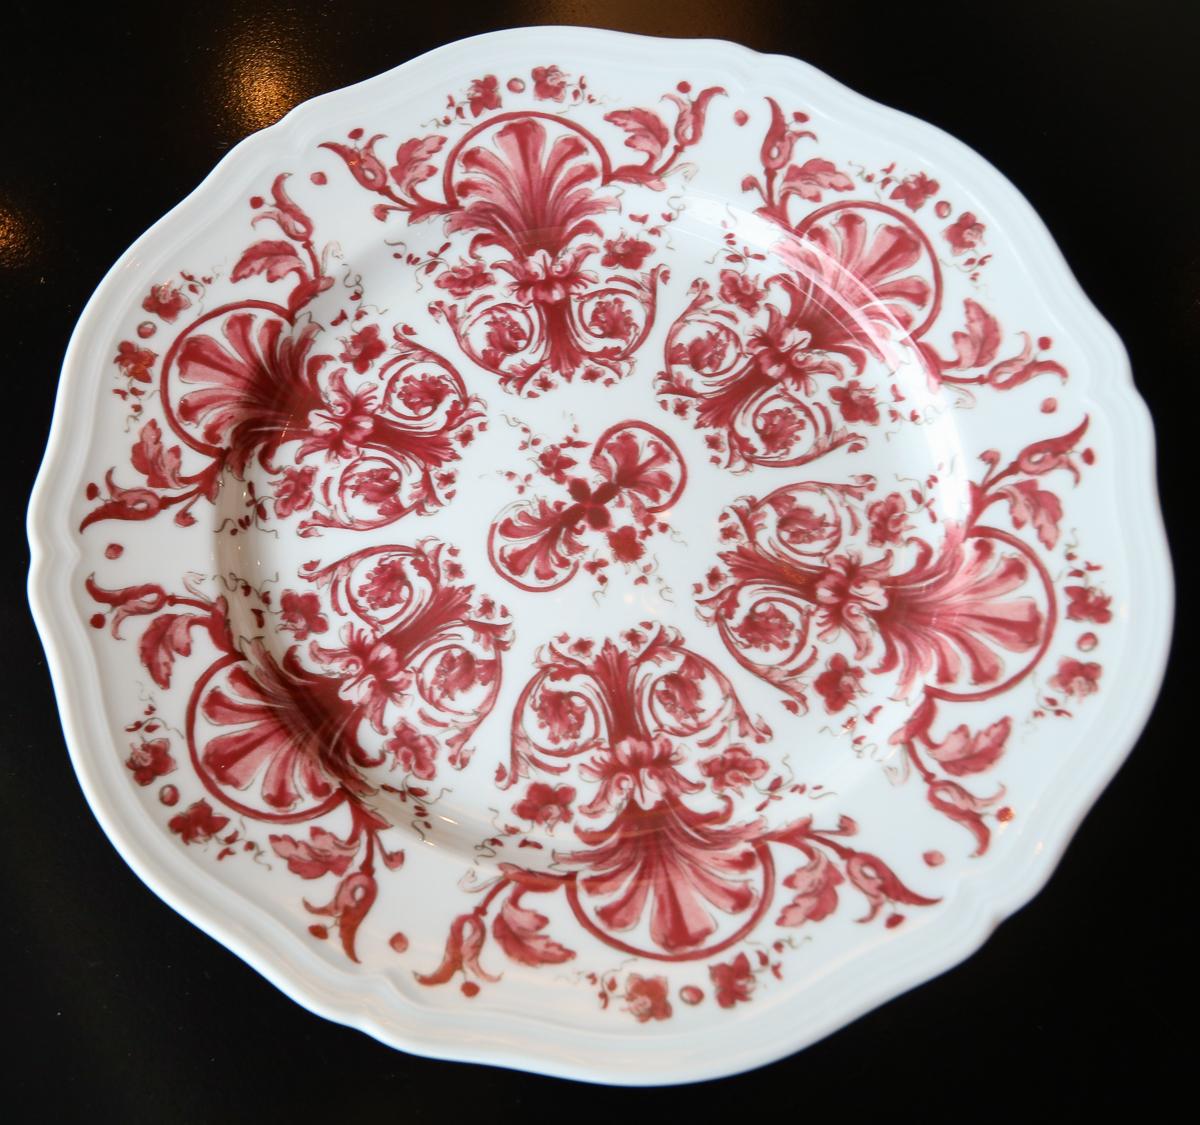 Contemporary Richard Ginori Babele Rosso Red Dinner Plate